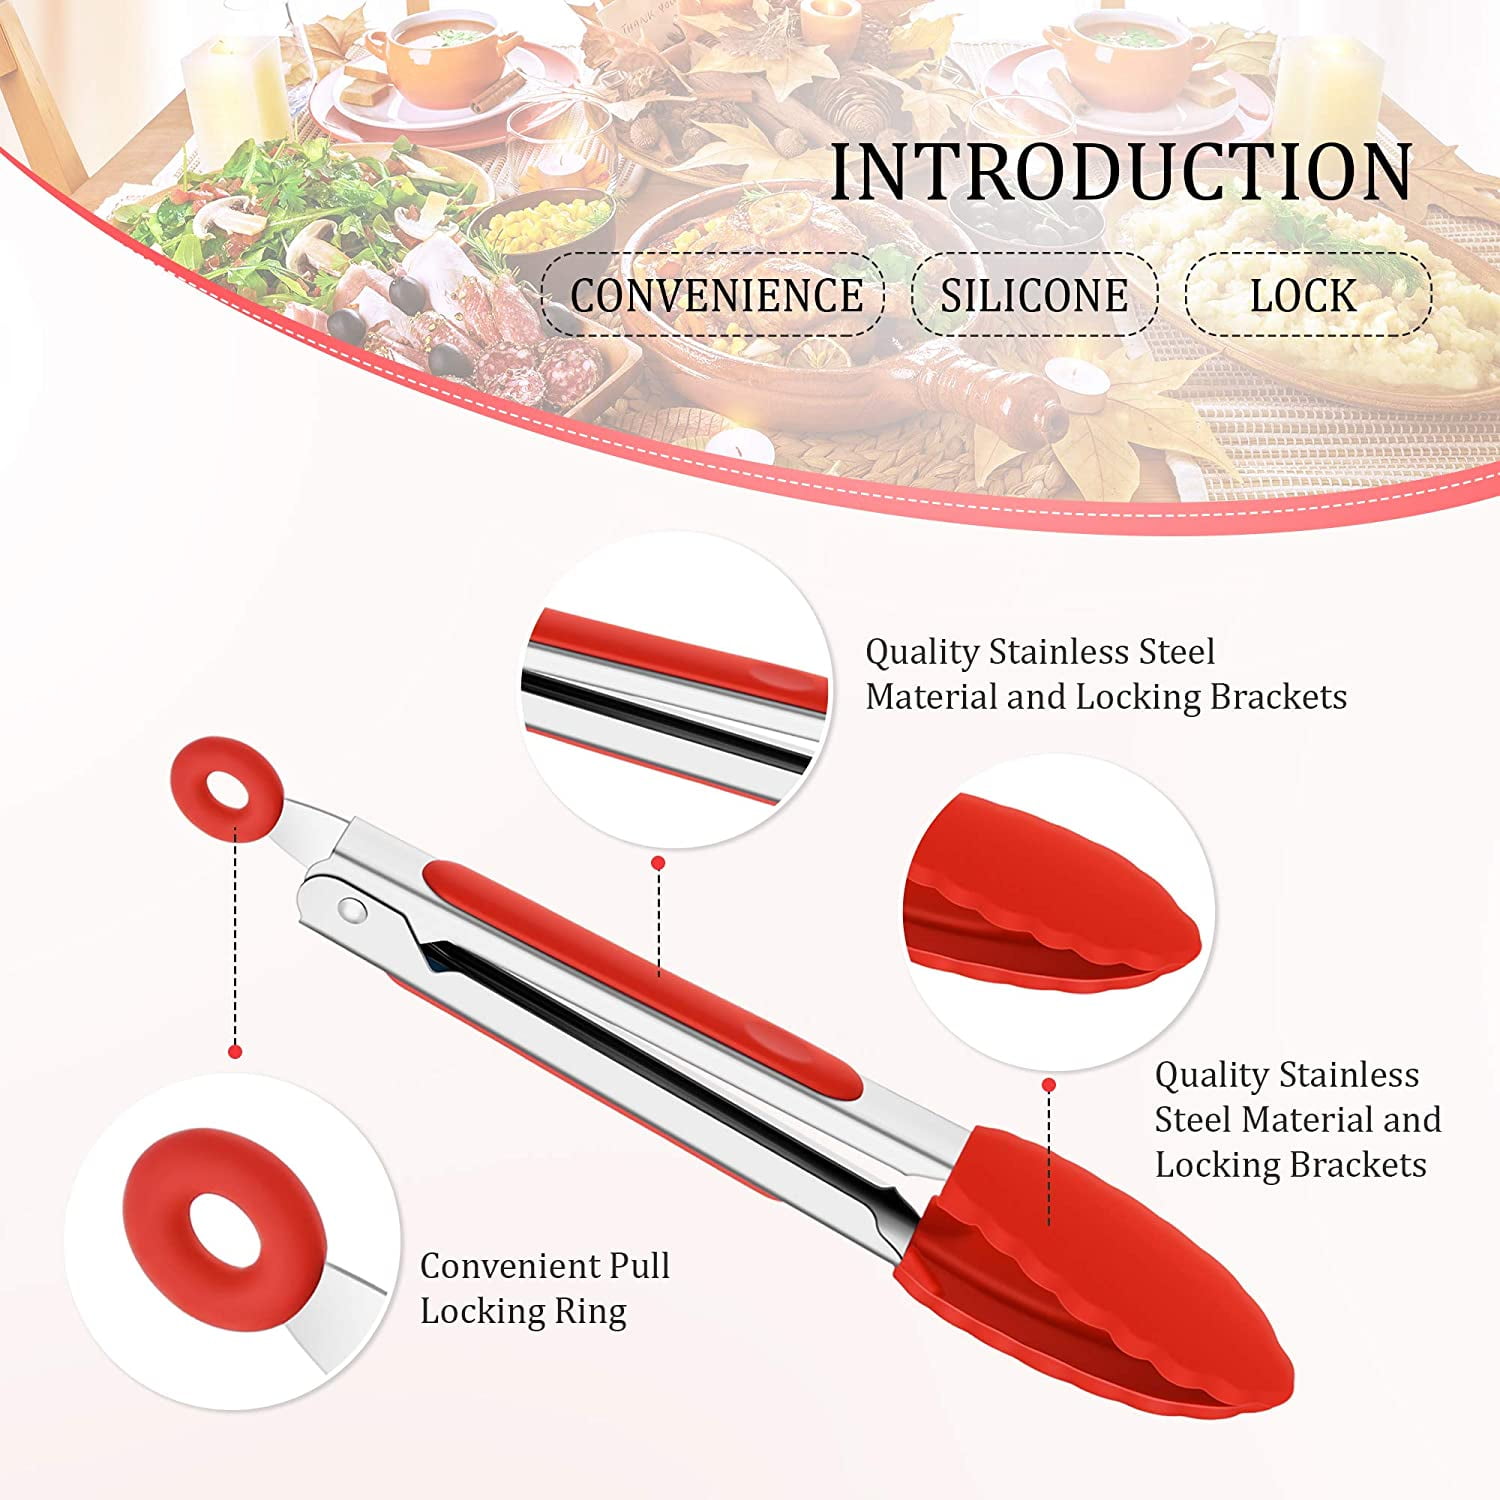 Serving tongs »Classic Silicone Mini«, 21 cm - Westmark Shop